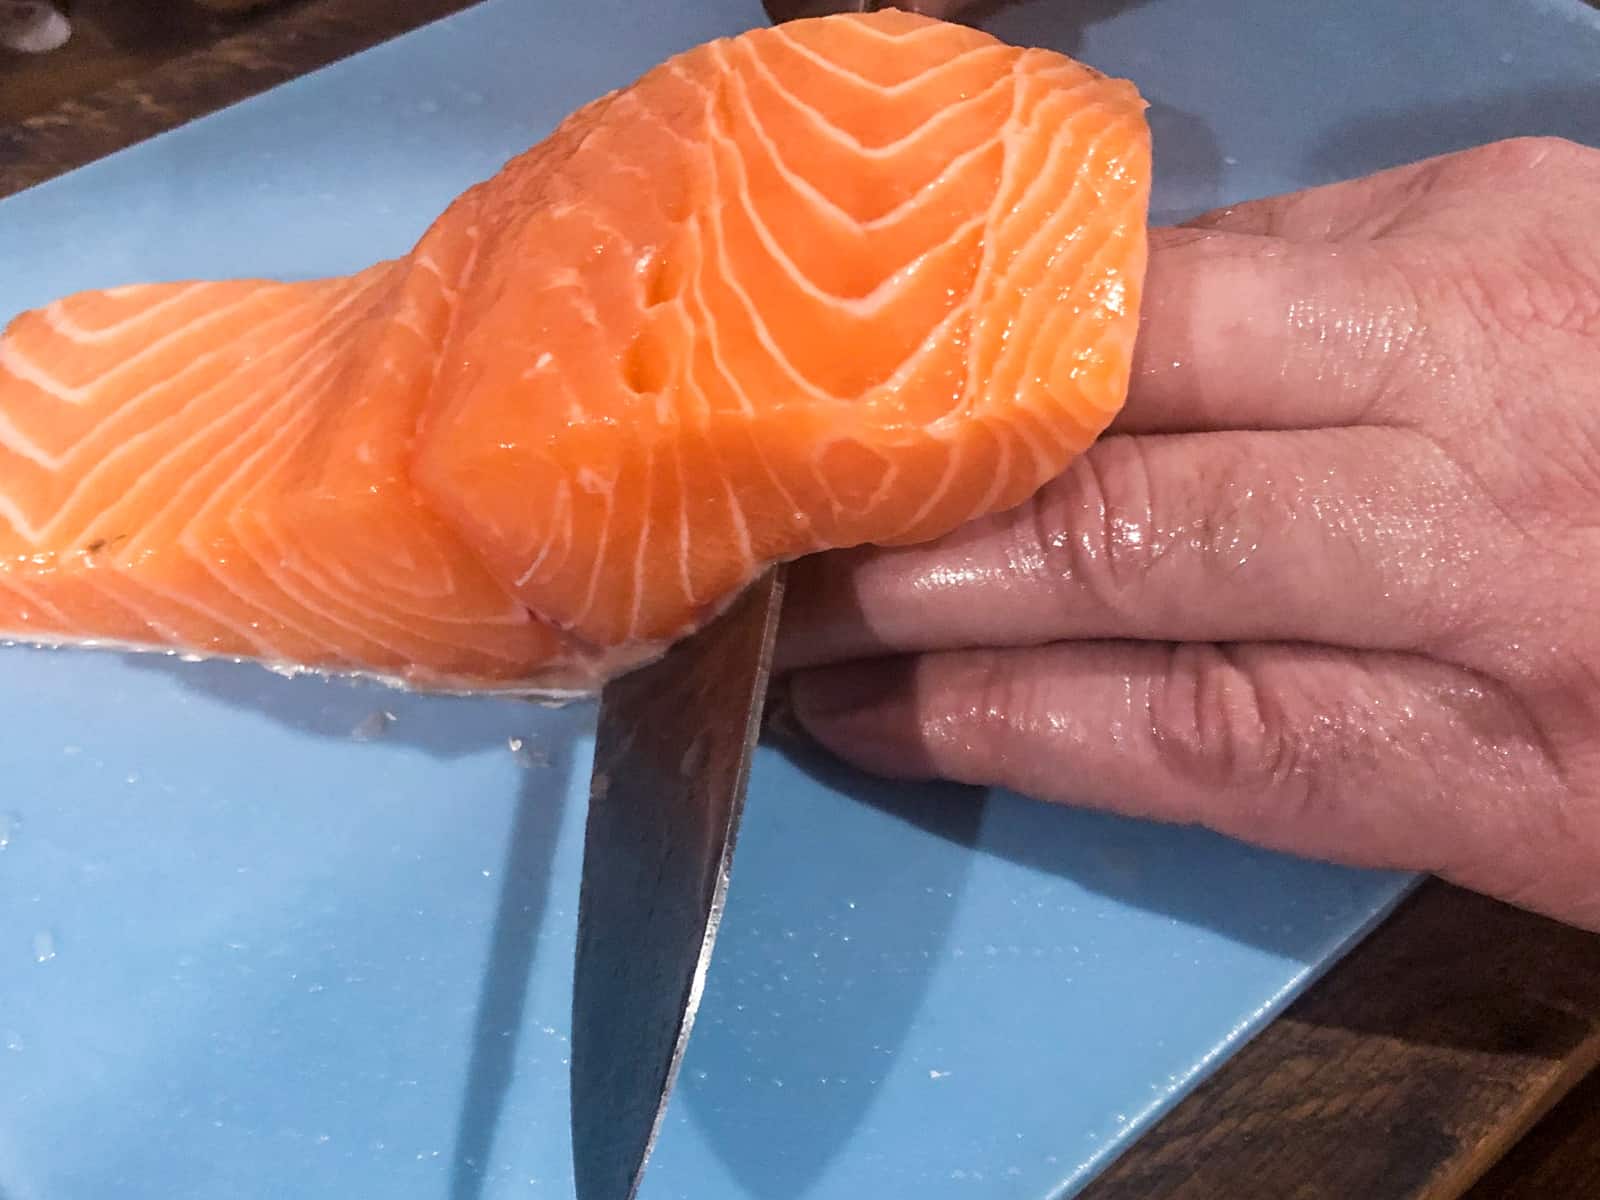 Showing how to remove the skin from salmon fillets.